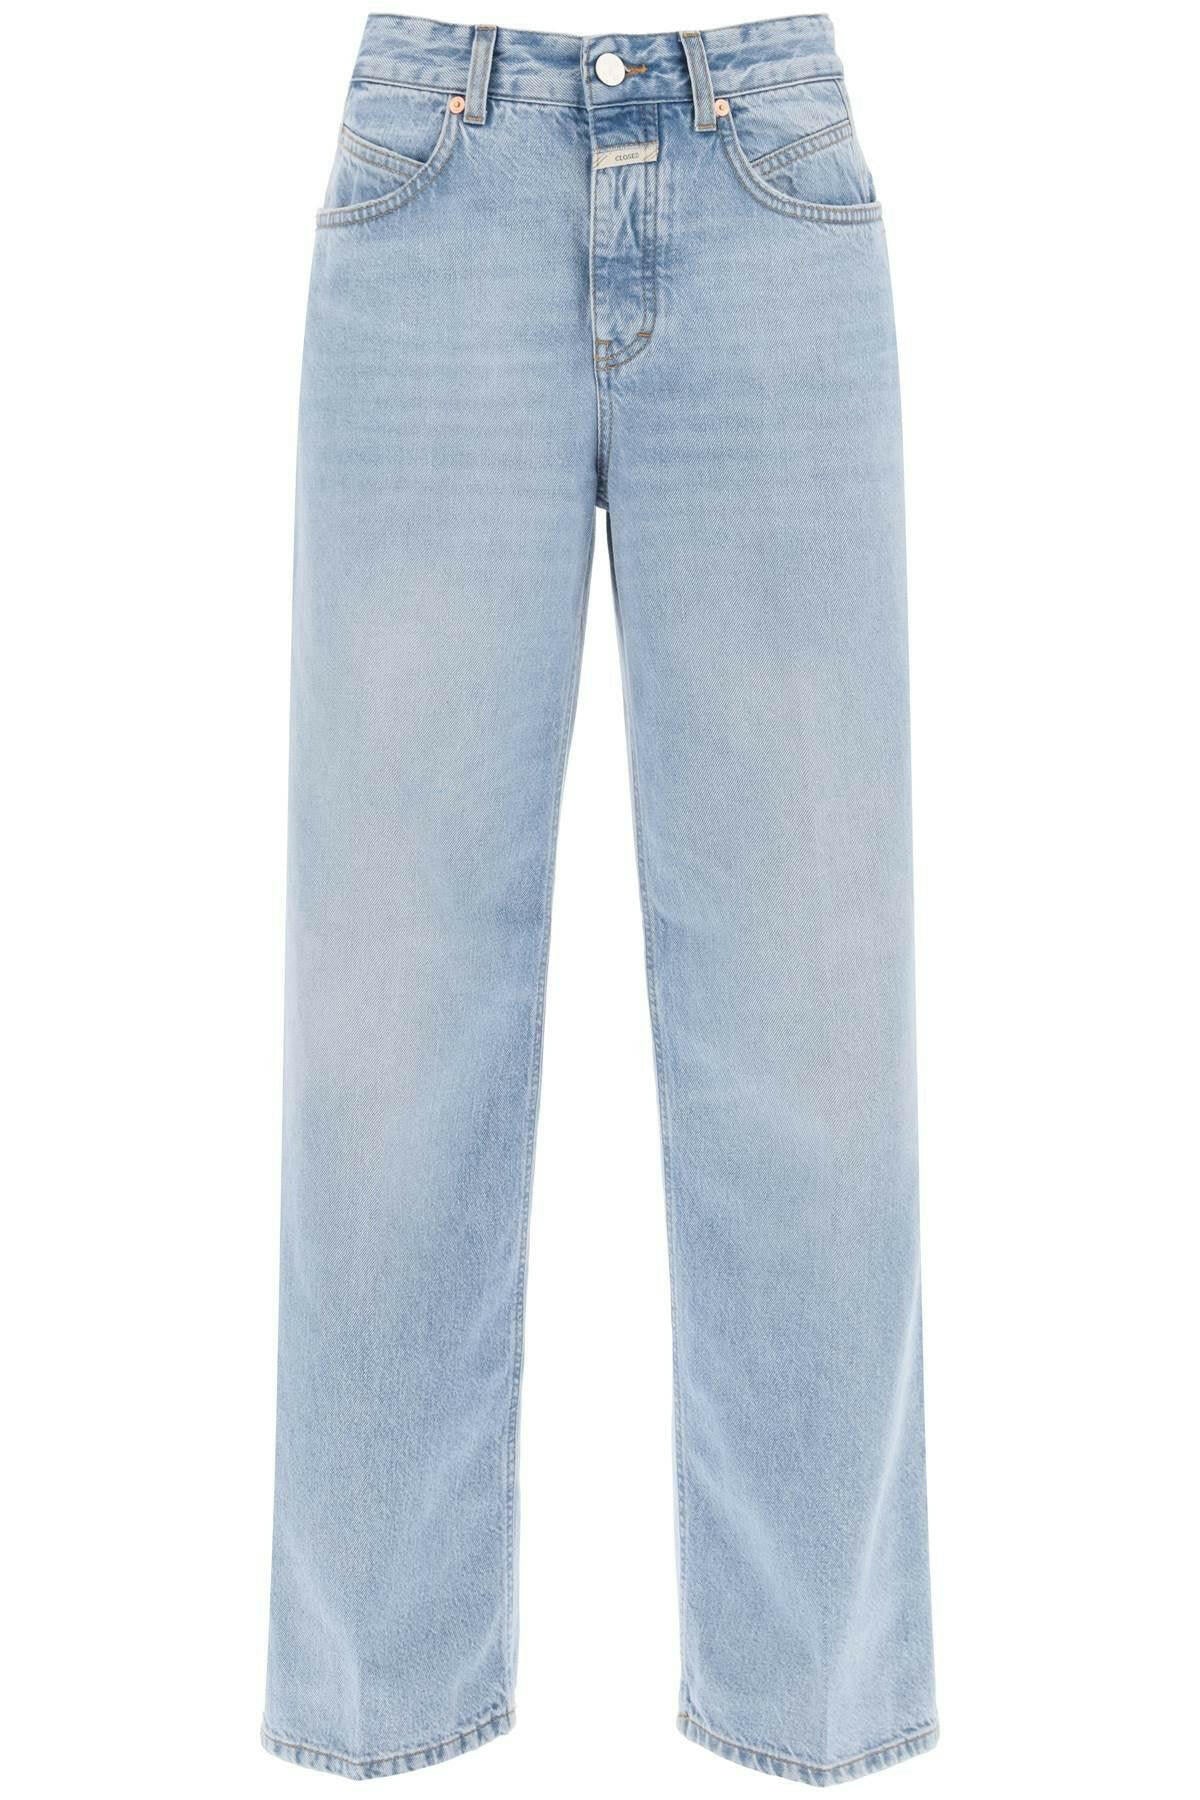 Loose Jeans With Tapered Cut CLOSED JOHN JULIA.